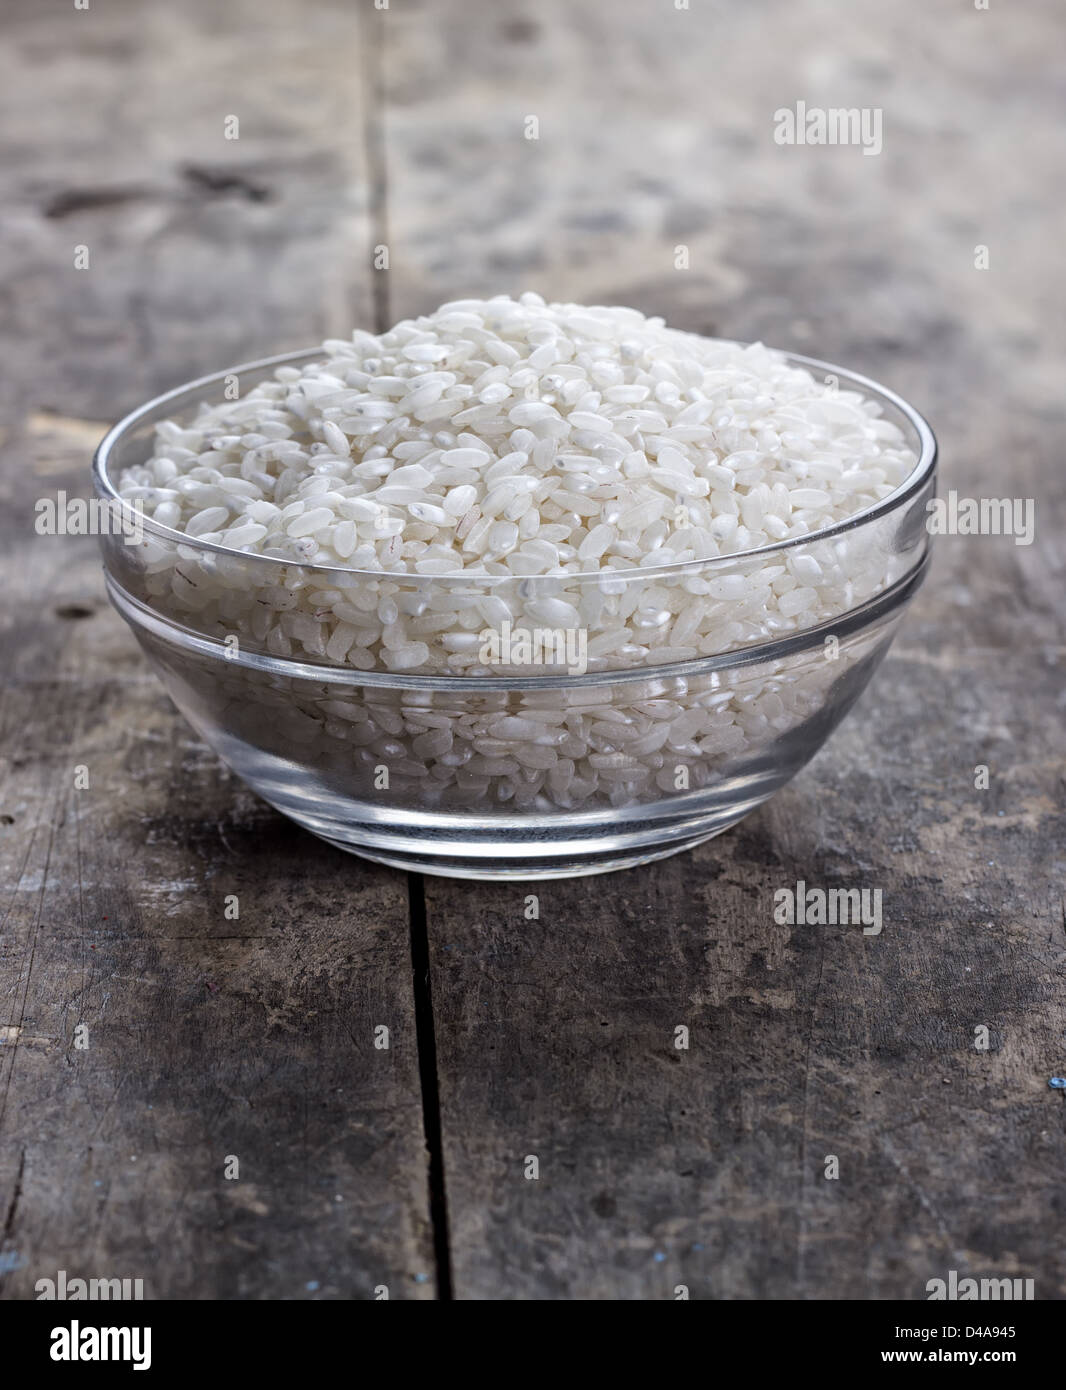 rice in a glass bowl on old wooden table Stock Photo